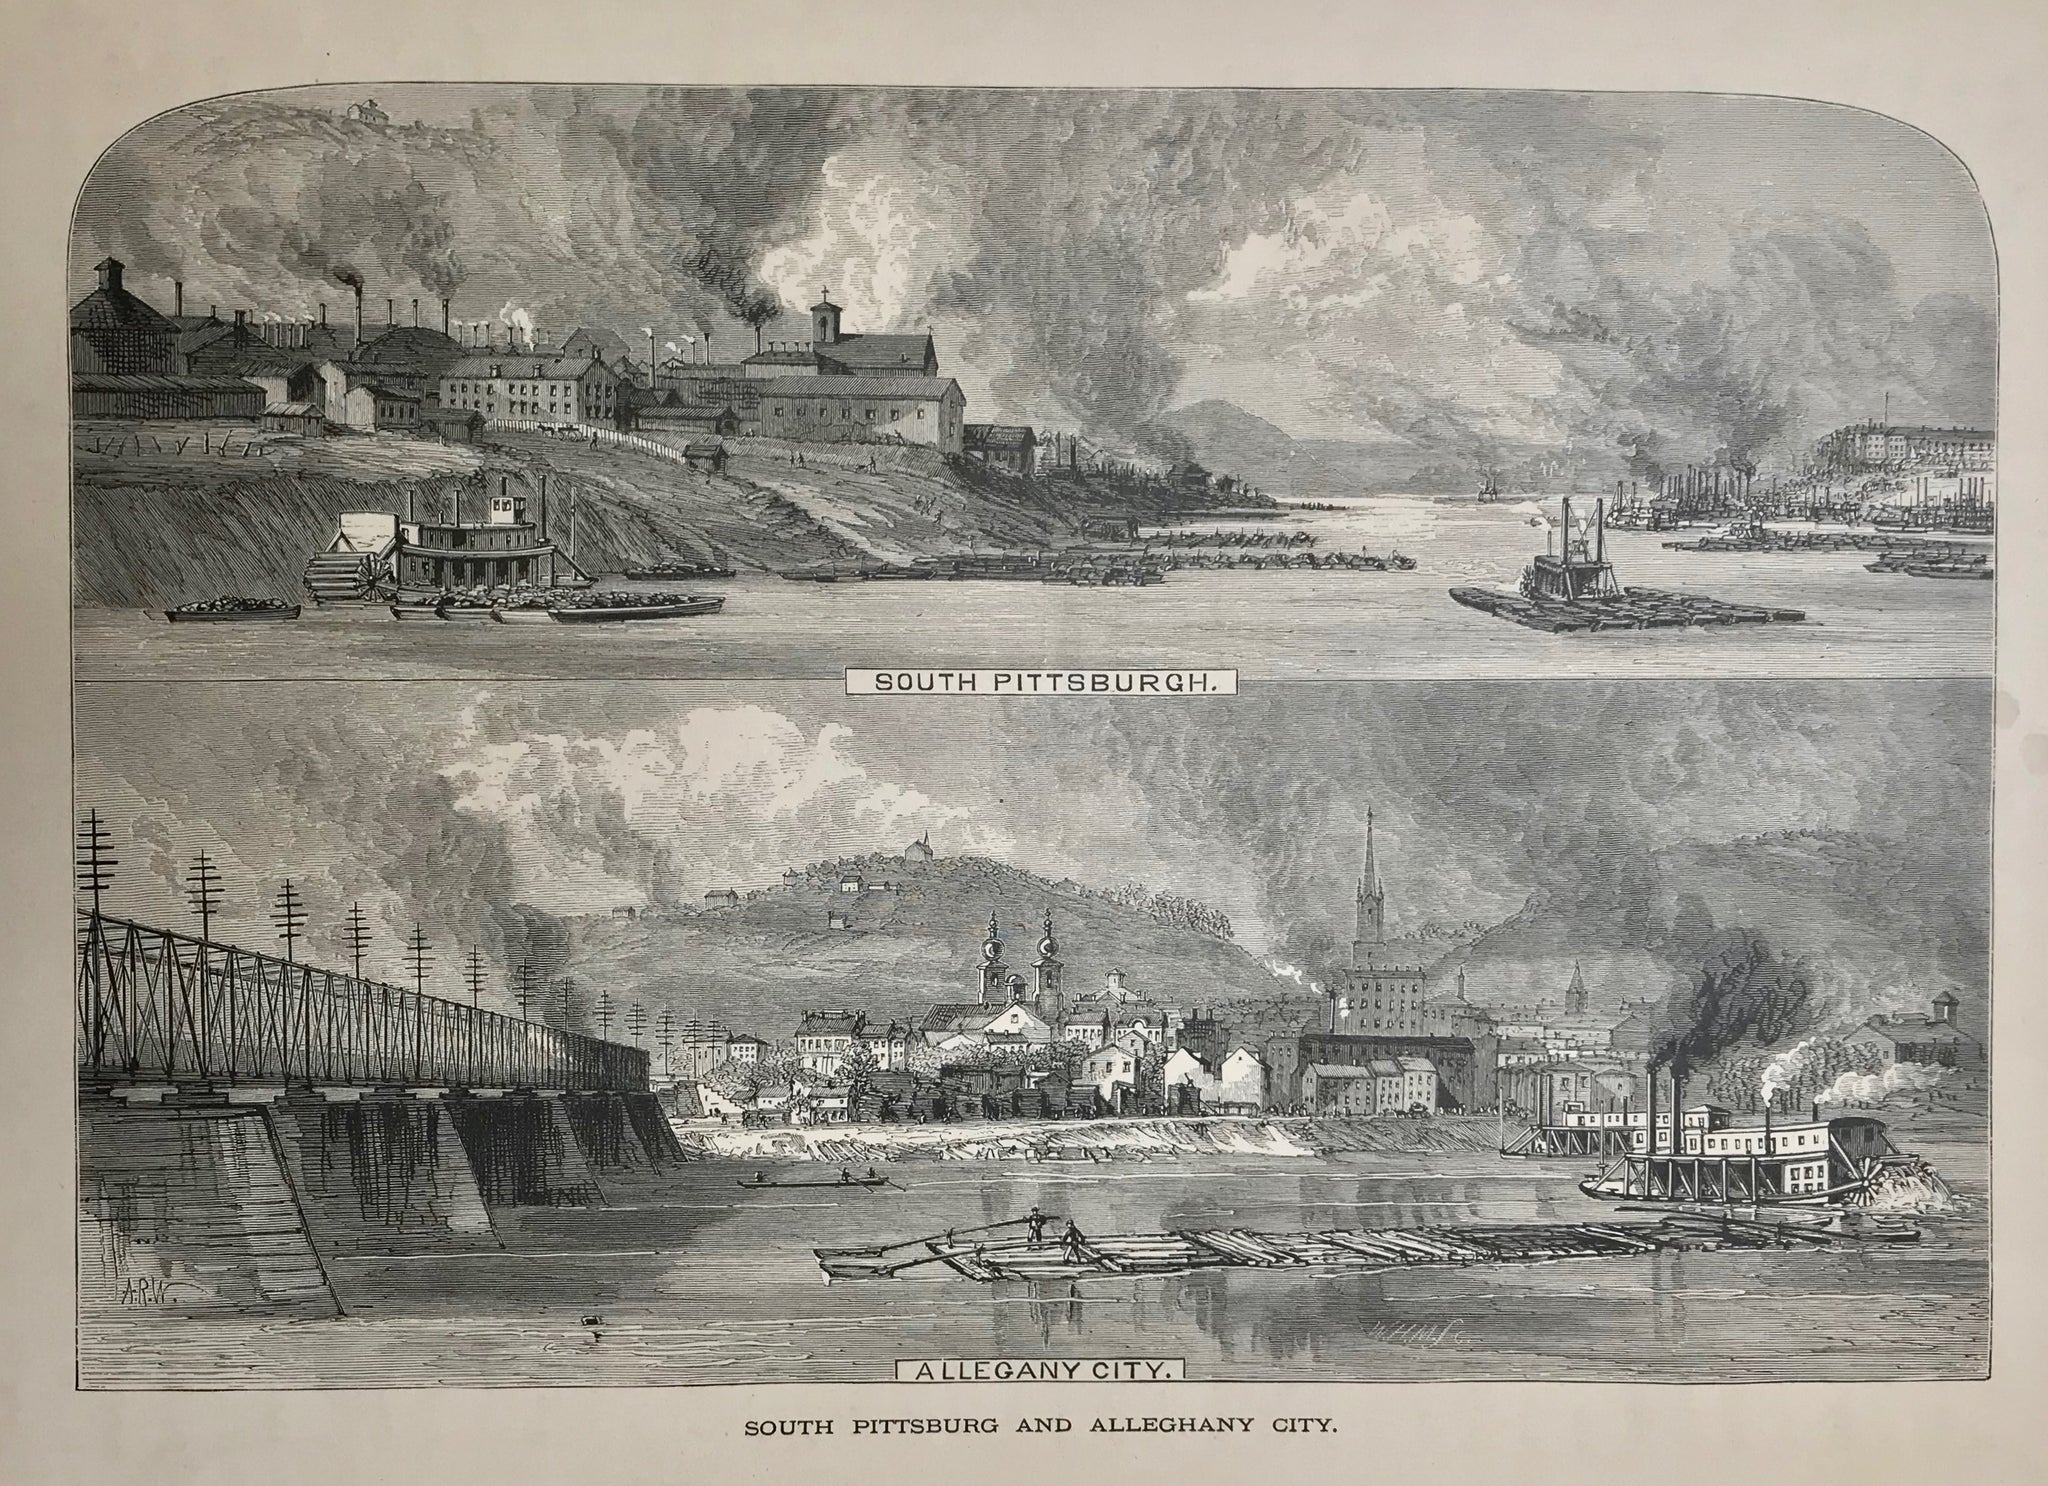 USA, "South Pittsburg and Allegheny City."  Wood engraving by Alfred R. Waud from the "Juanita", ca 1870. Print has age toning and text with image (Ohio by Marietta) on backside.